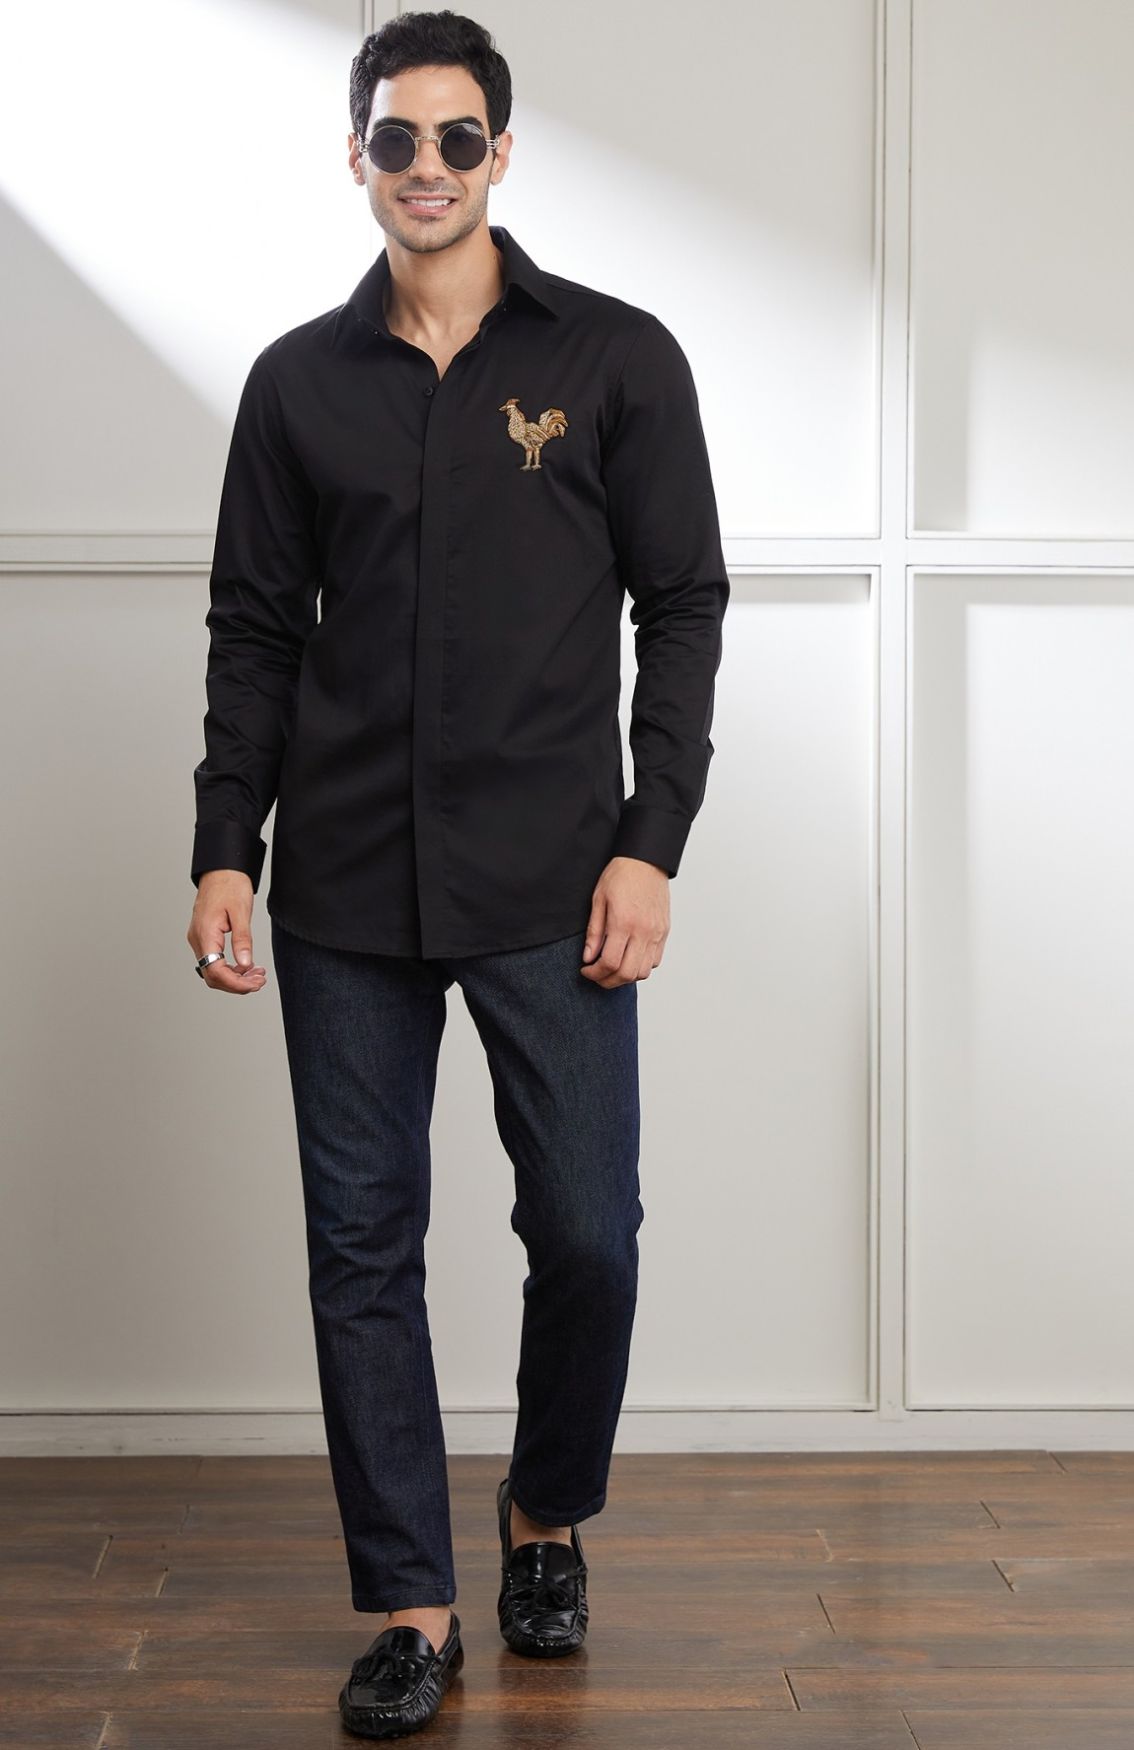 Rooster Crest Shirt